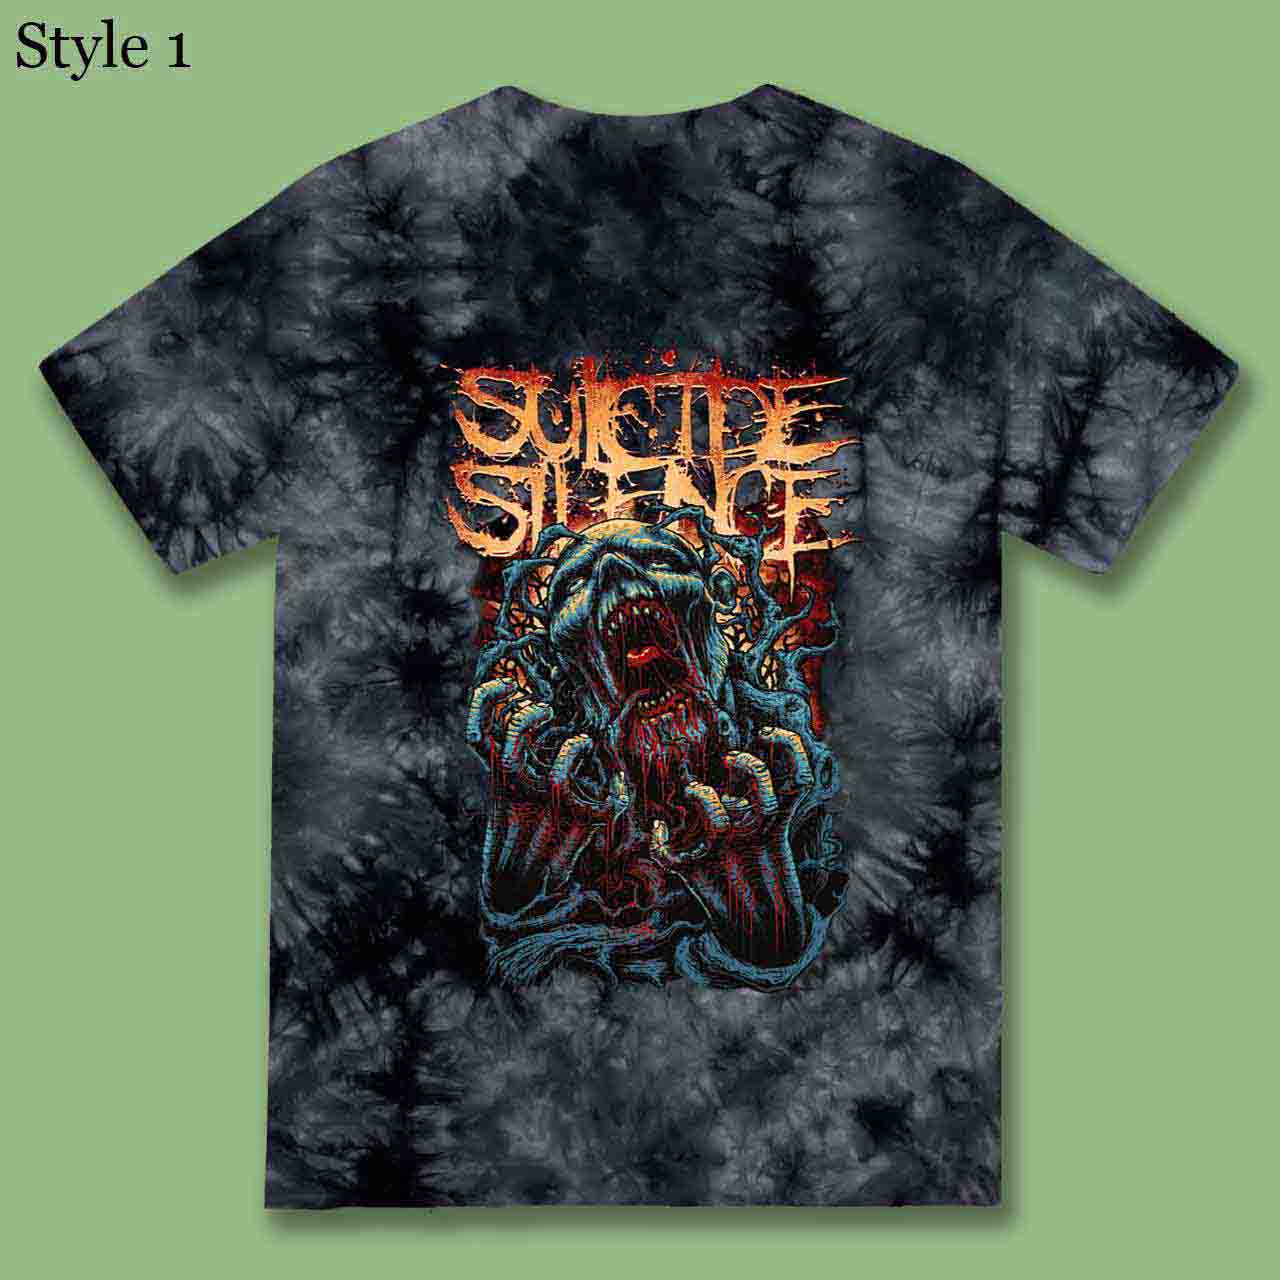 Vintage Suicide Silence The Suffering Shirt Tie Dye